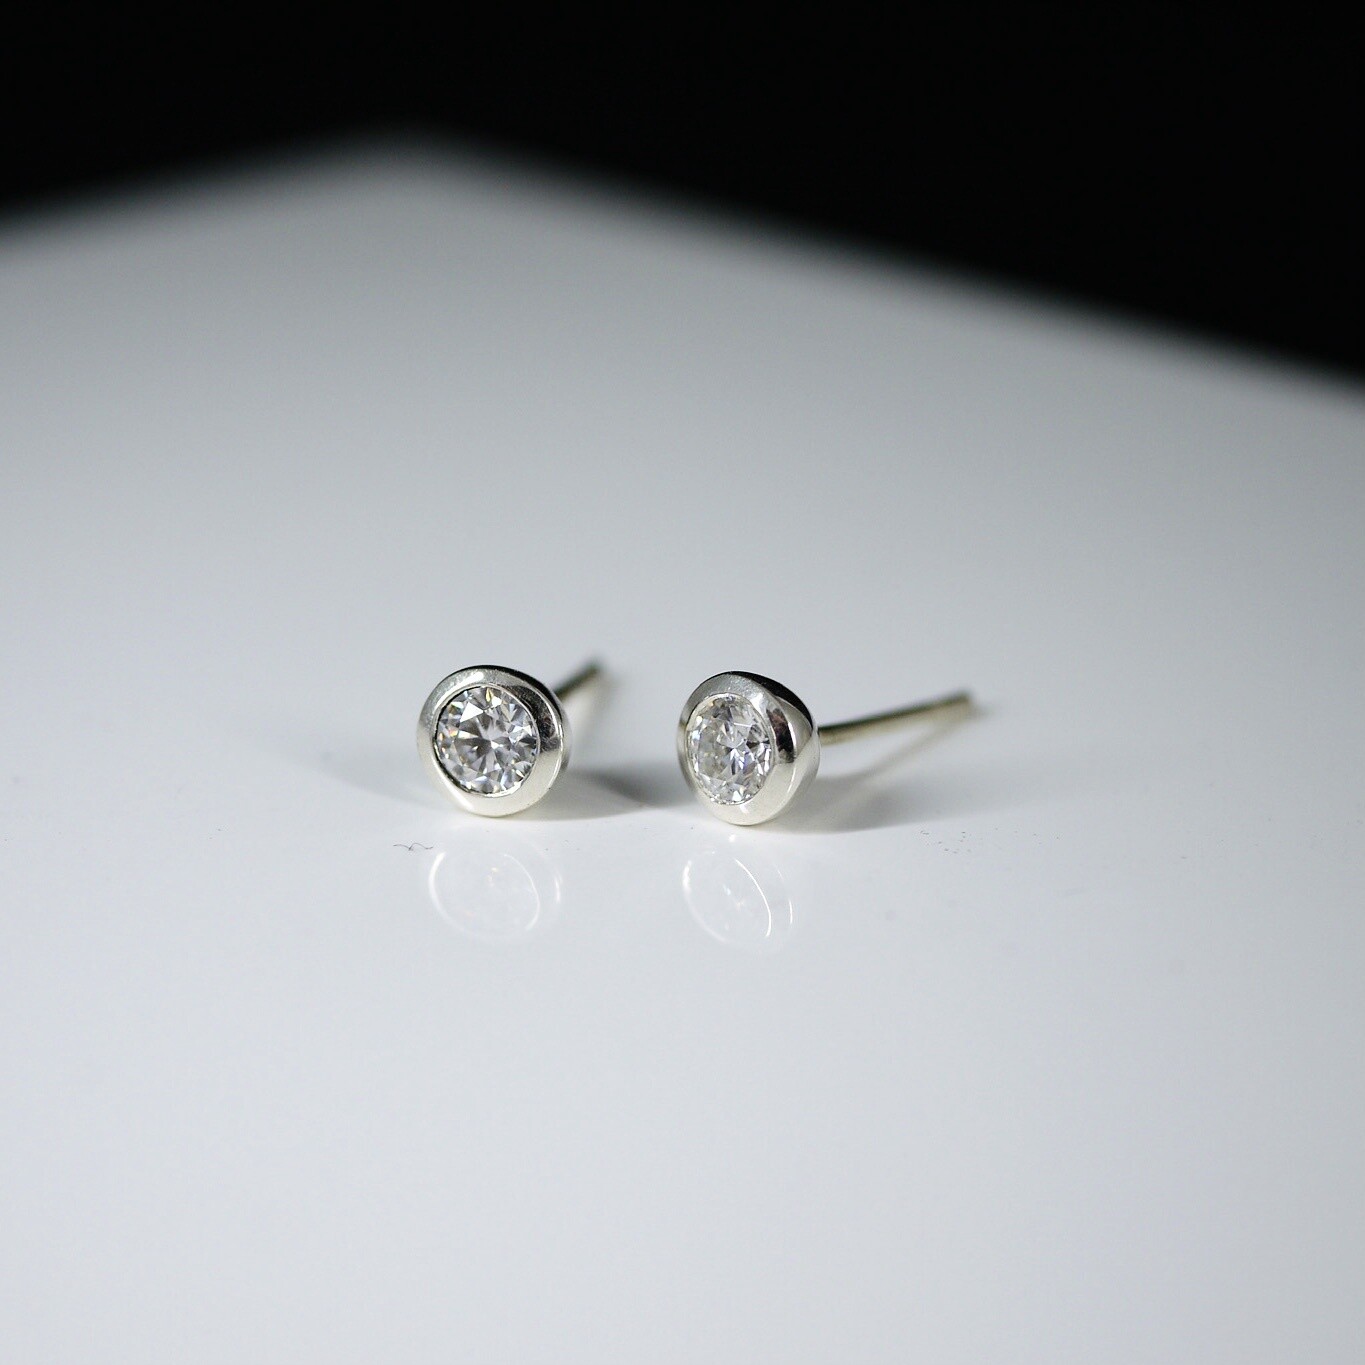 Juicy studs in white gold